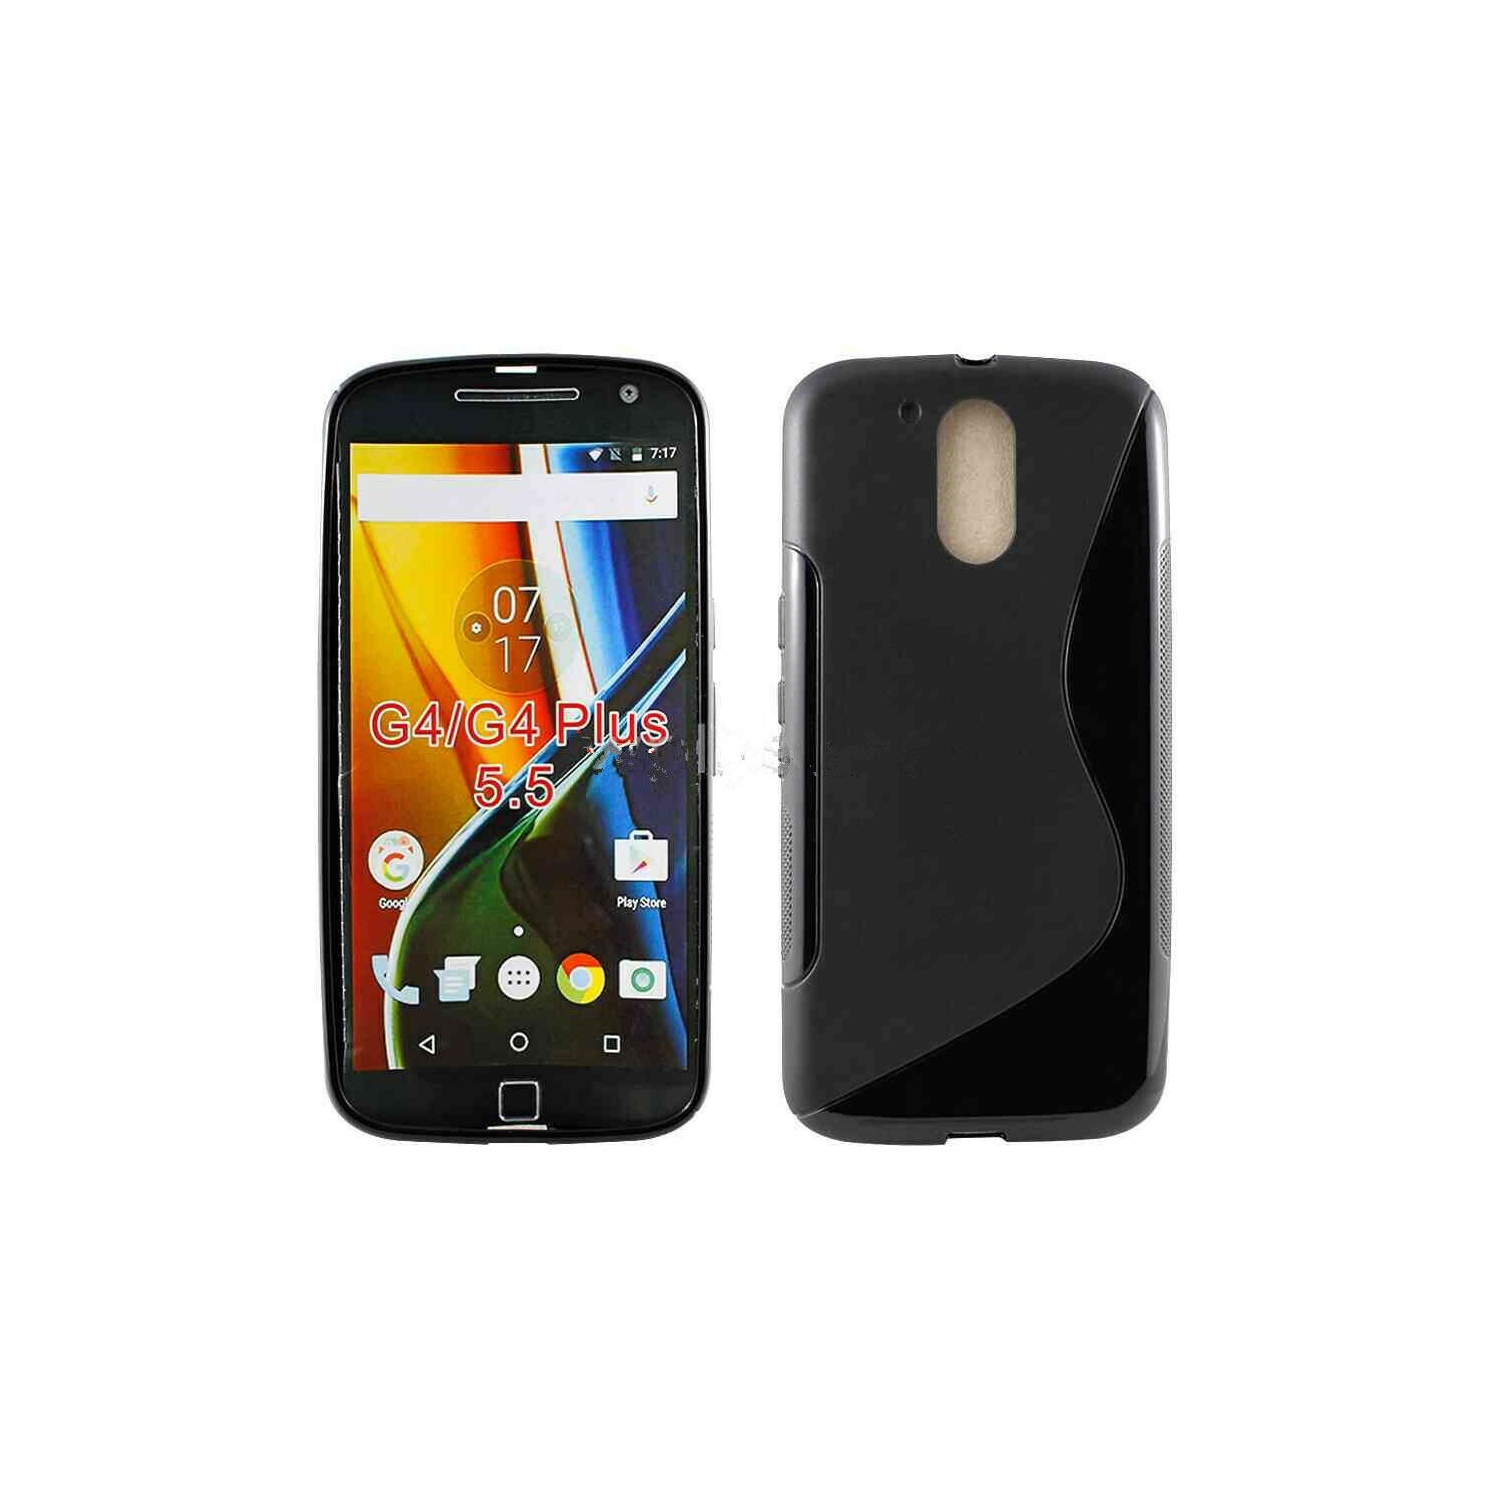 【CSmart】 Ultra Thin Soft TPU Silicone Jelly Bumper Back Cover Case for Motorola G4 Play, Black